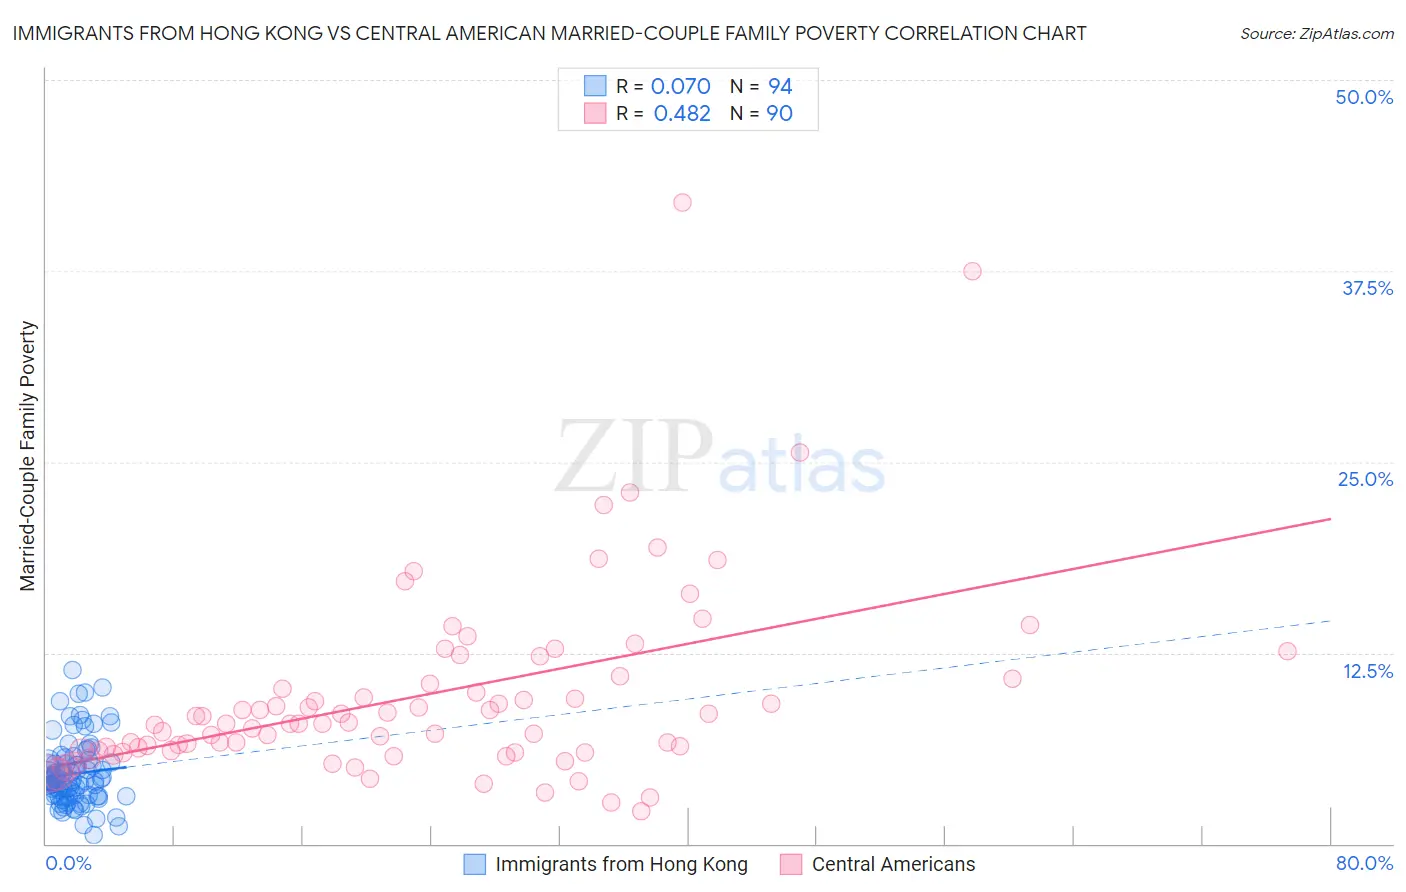 Immigrants from Hong Kong vs Central American Married-Couple Family Poverty